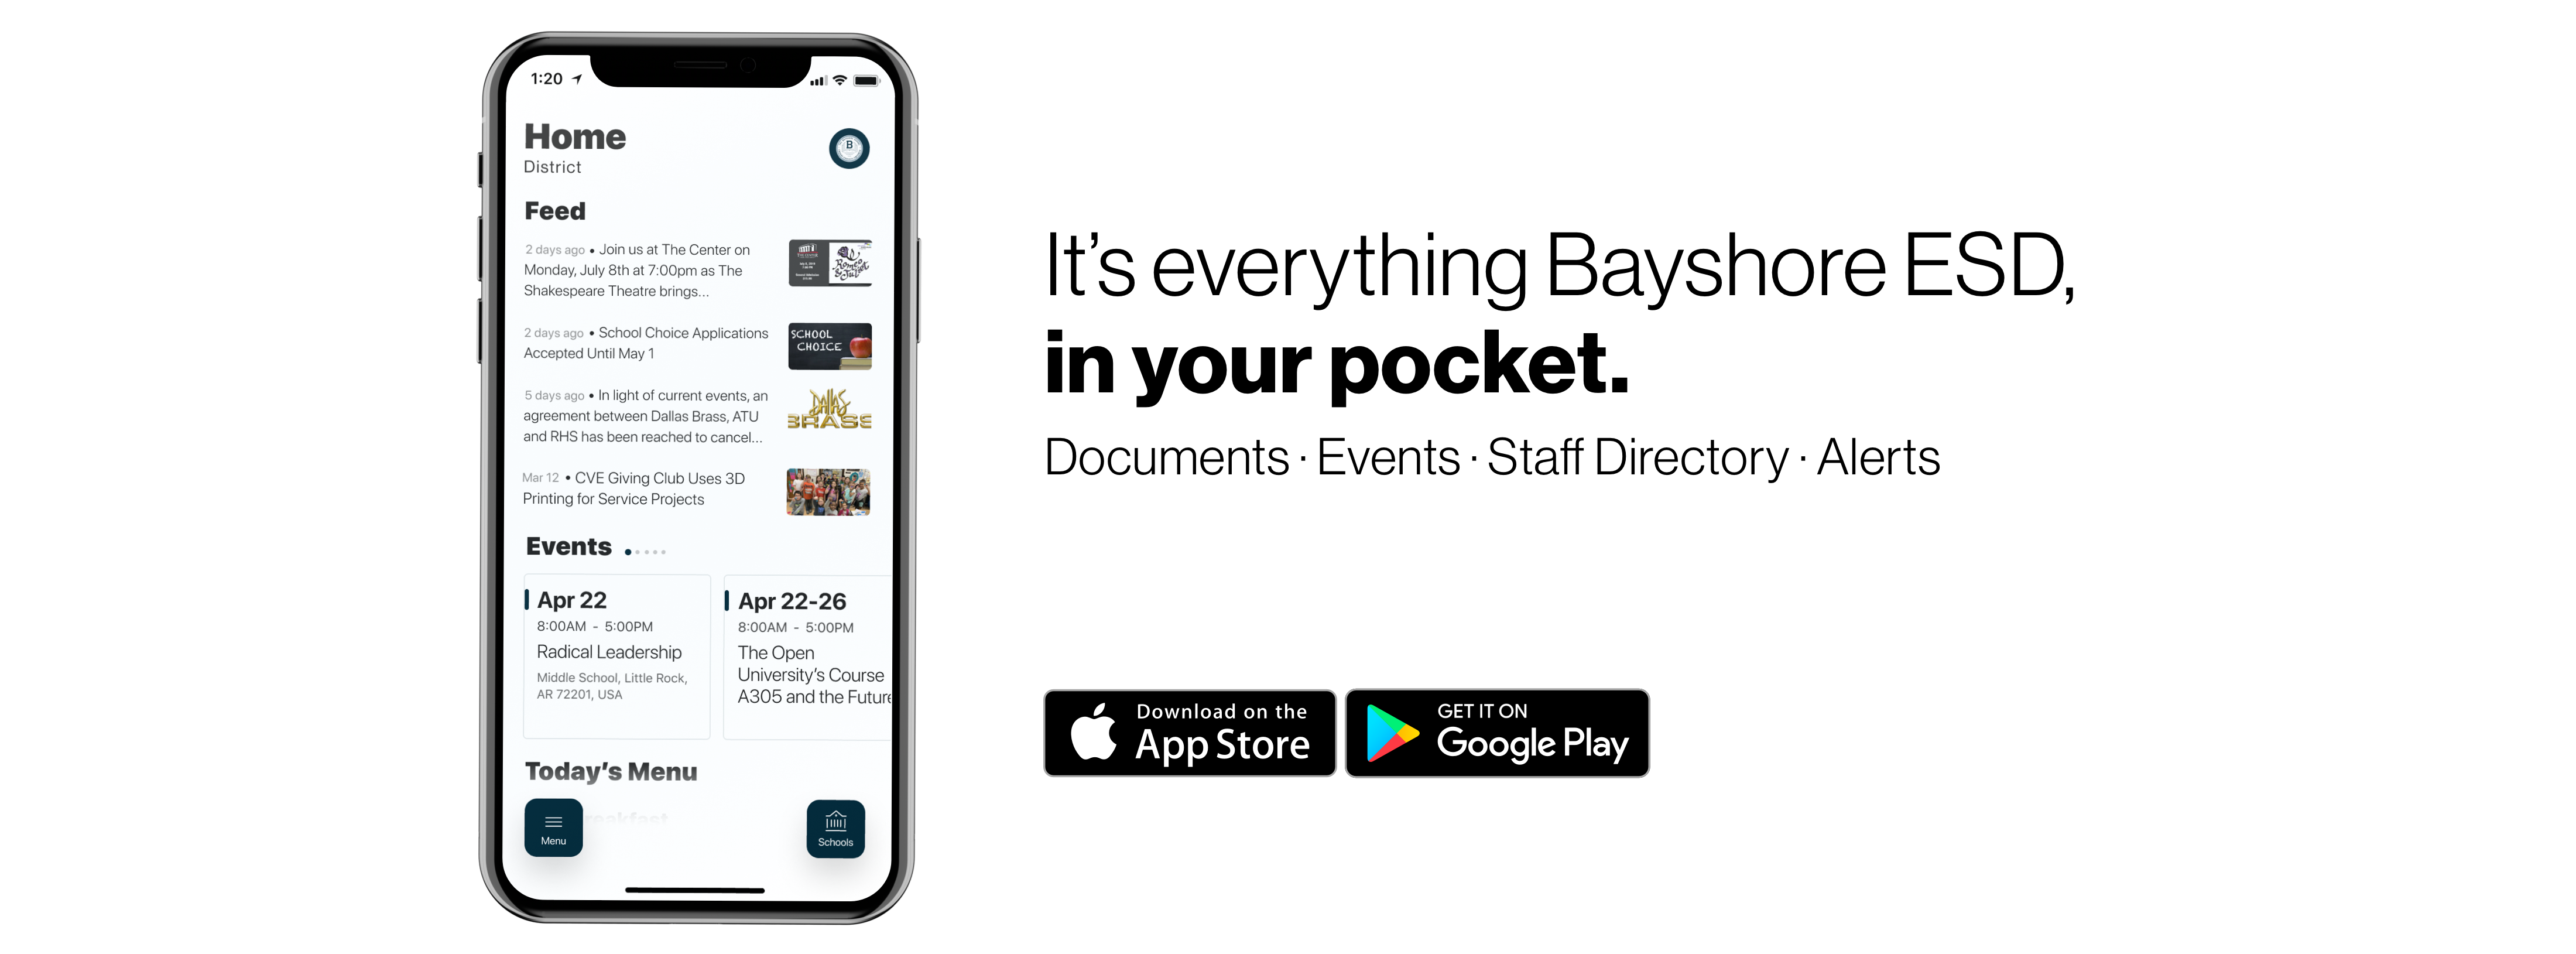 It's Everything Bayshore in your pocket.